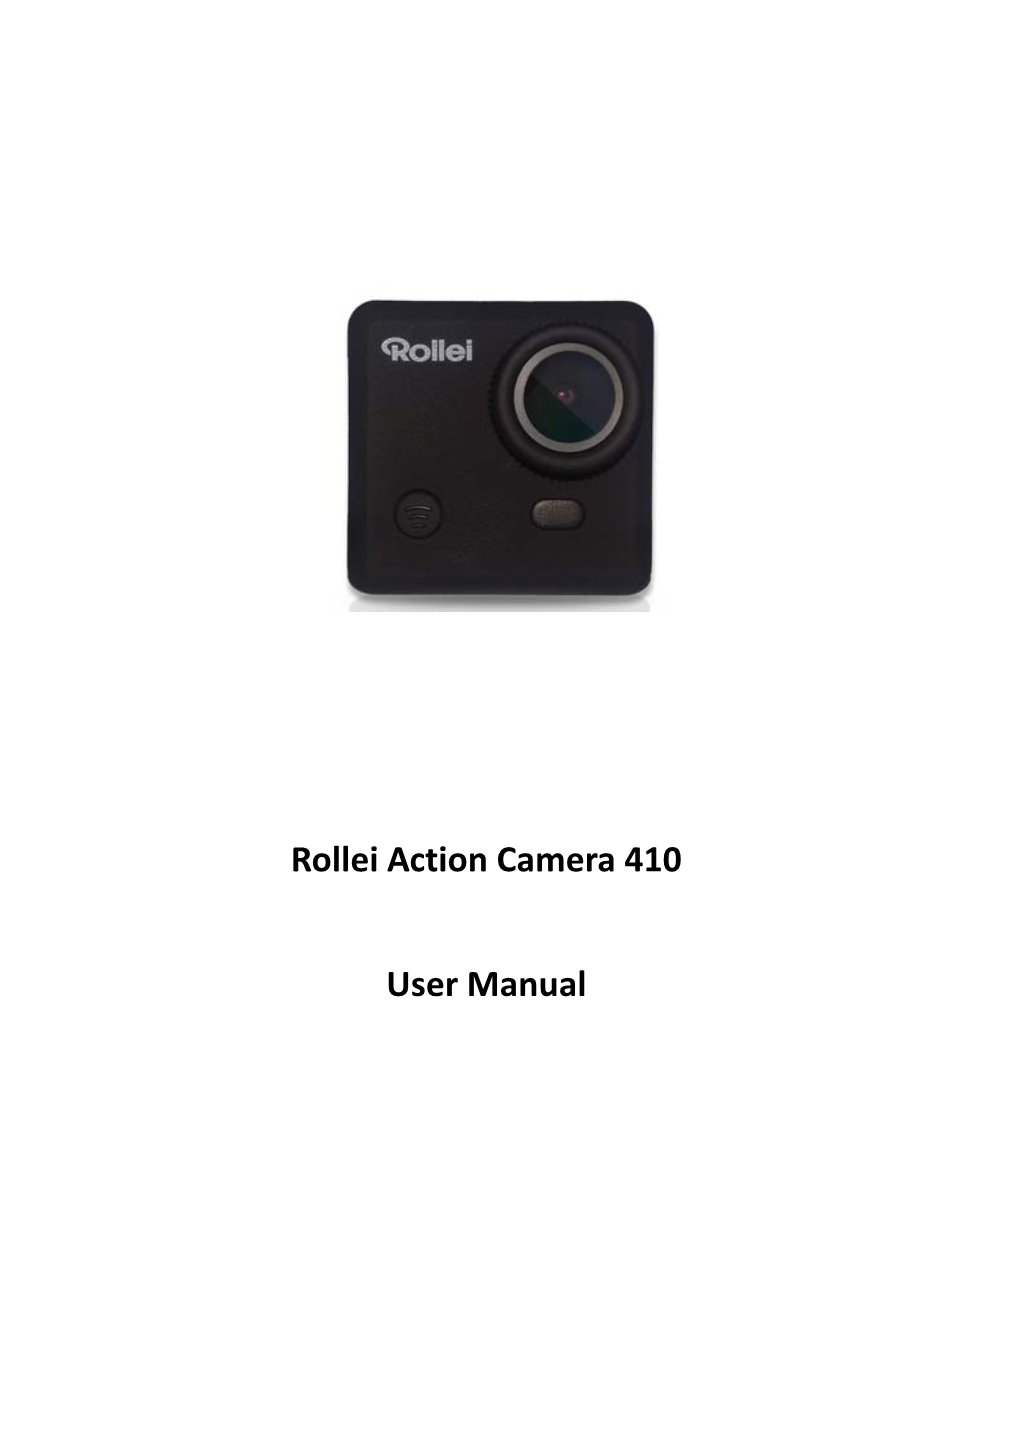 Rollei Action Camera 410 User Manual